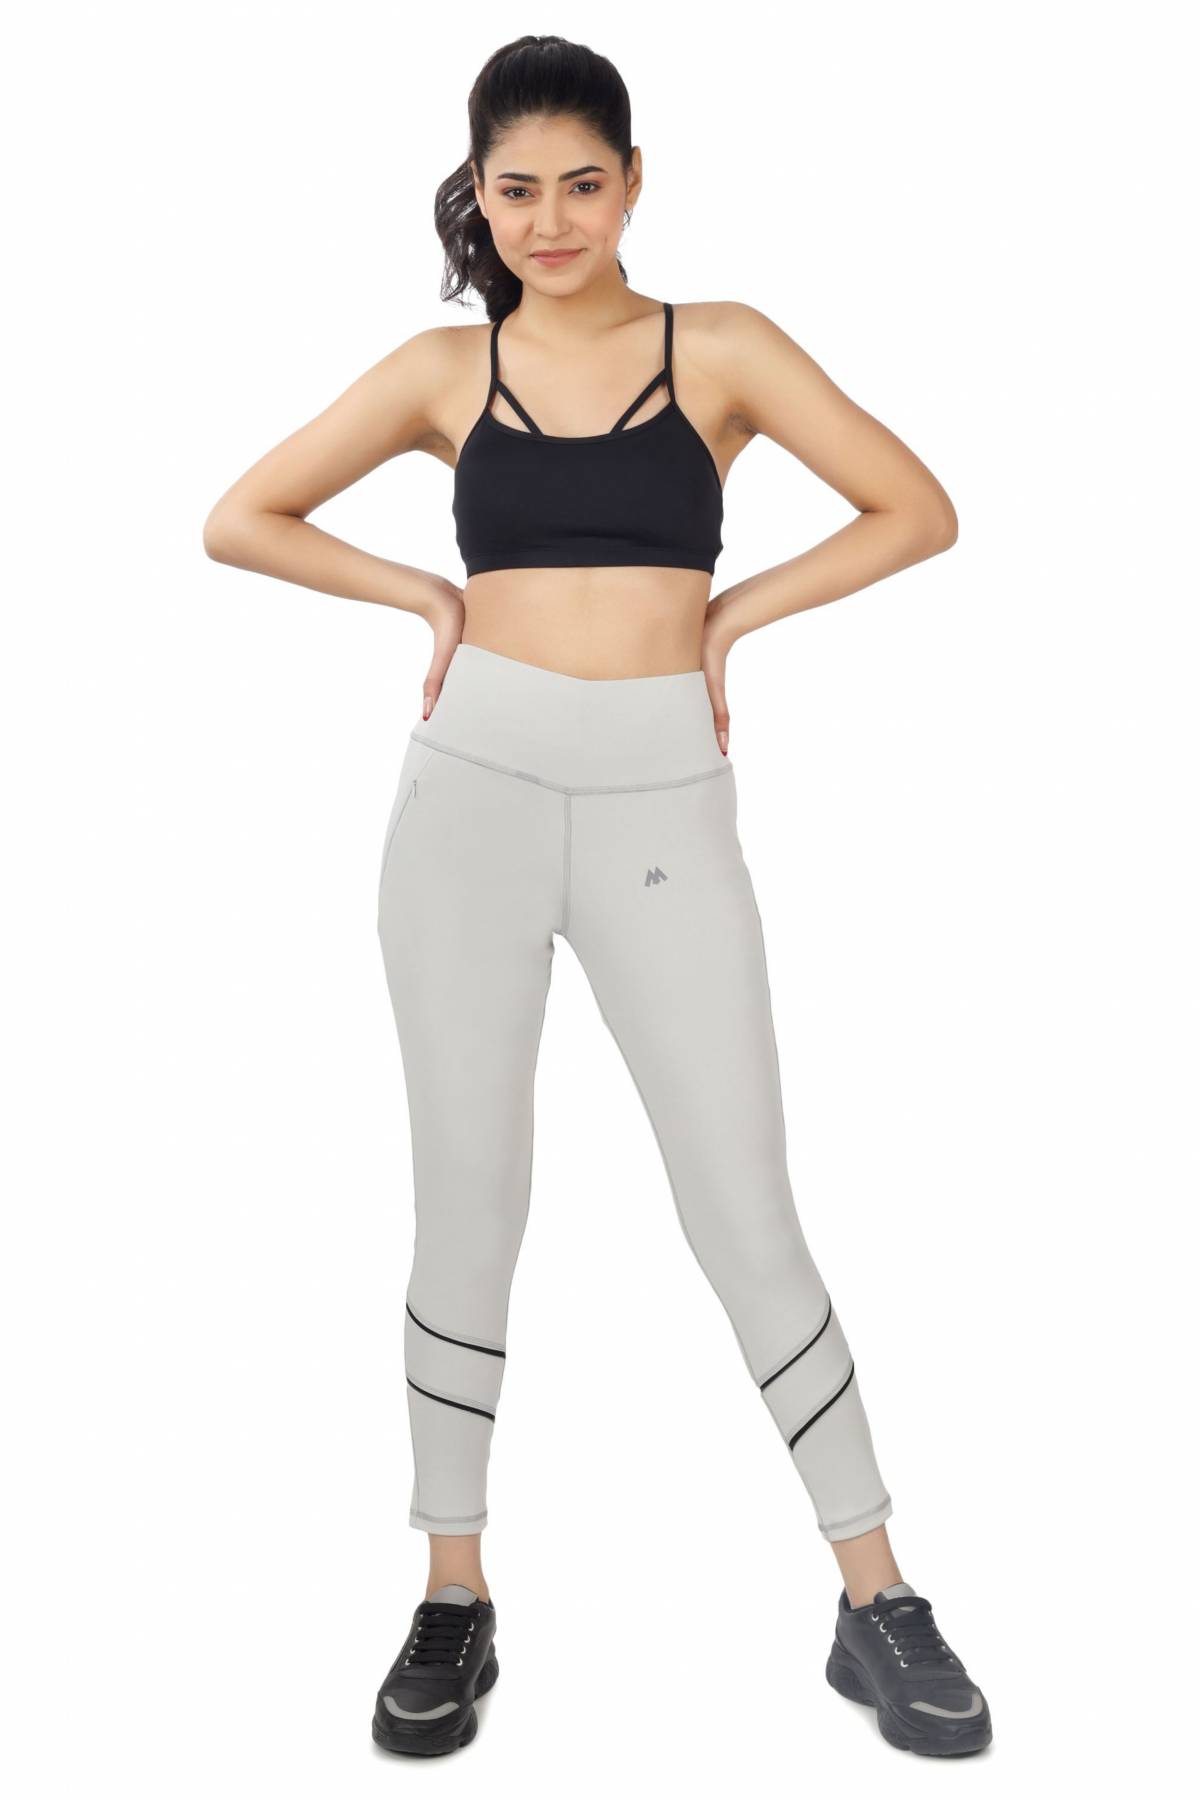 Disrupt Women Track Pants With Racer Back Crop Top Cord Set 2pc